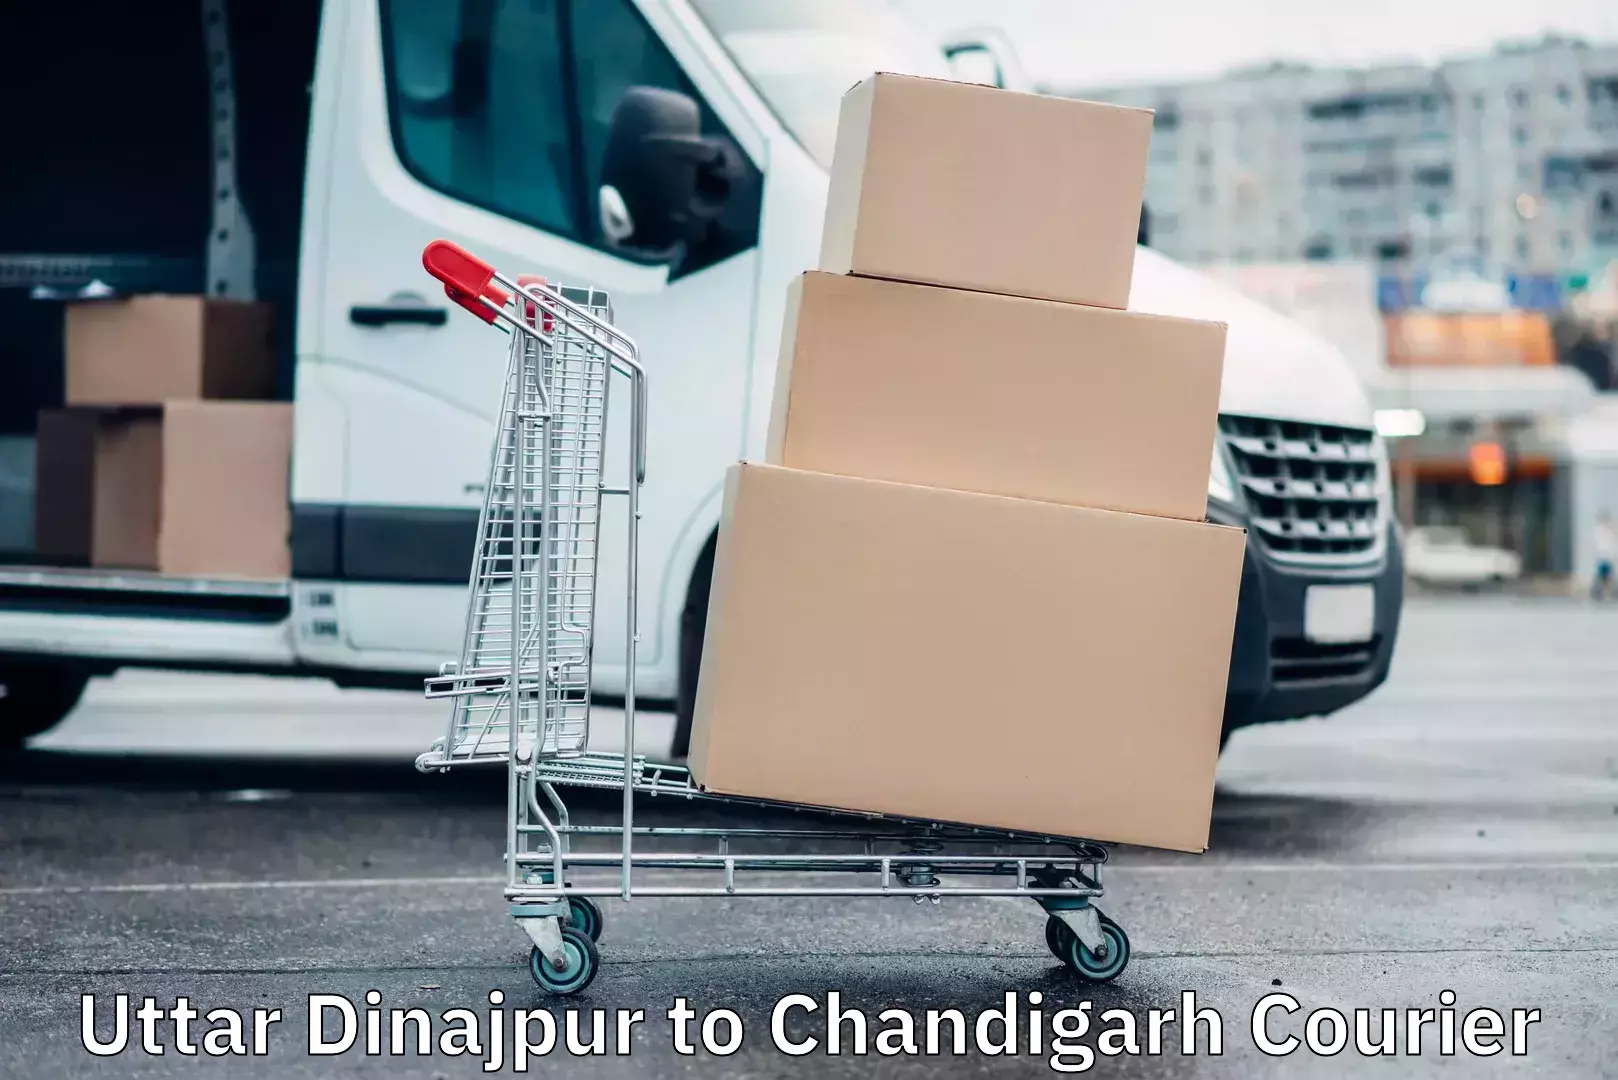 Nationwide delivery network Uttar Dinajpur to Chandigarh